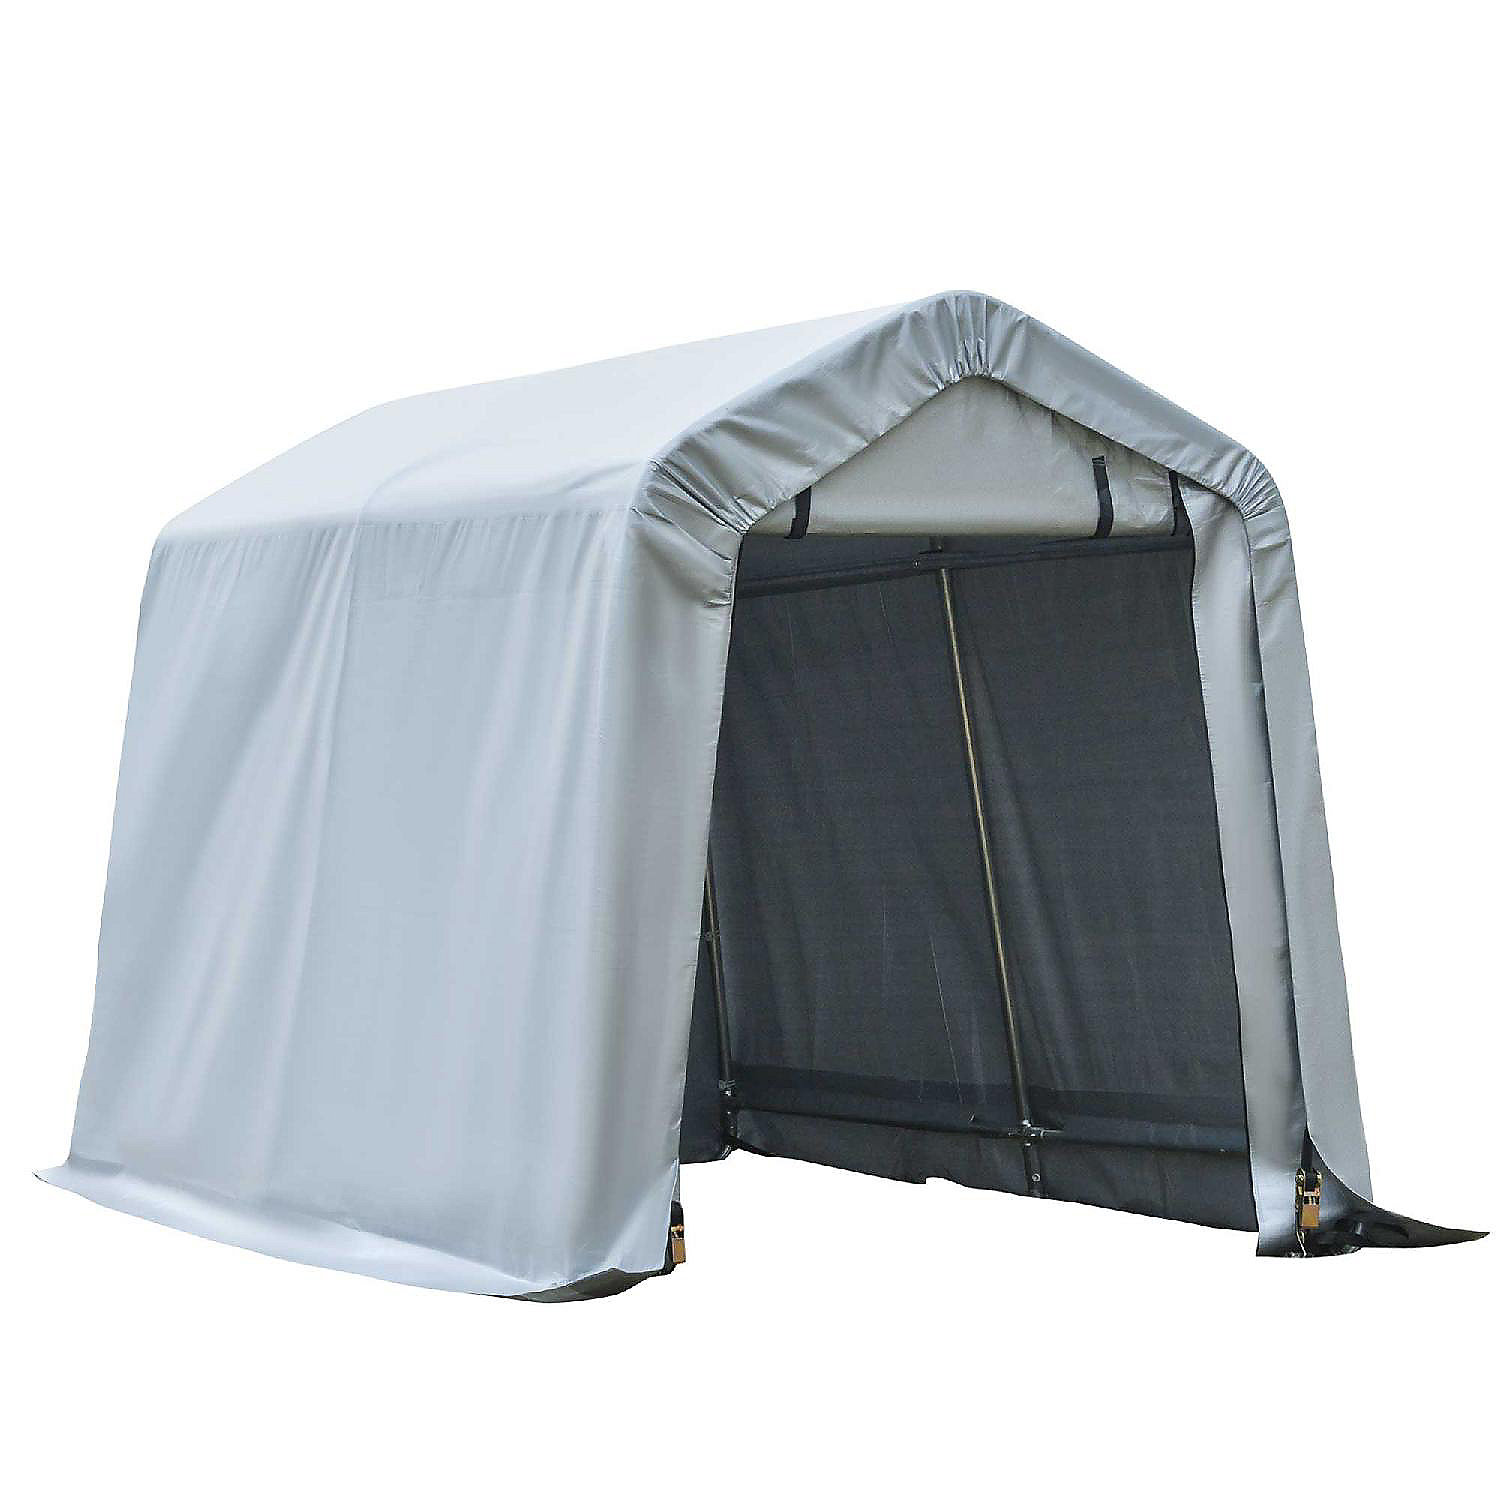 Gray ADVANCE OUTDOOR 6X8 ft Outdoor Portable Storage Shelter Shed with 2 Rolled up Zipper Doors & Vents Carport for Motorcycle Waterproof and UV Resistant Anti-Snow Portable Garage Kit Tent 